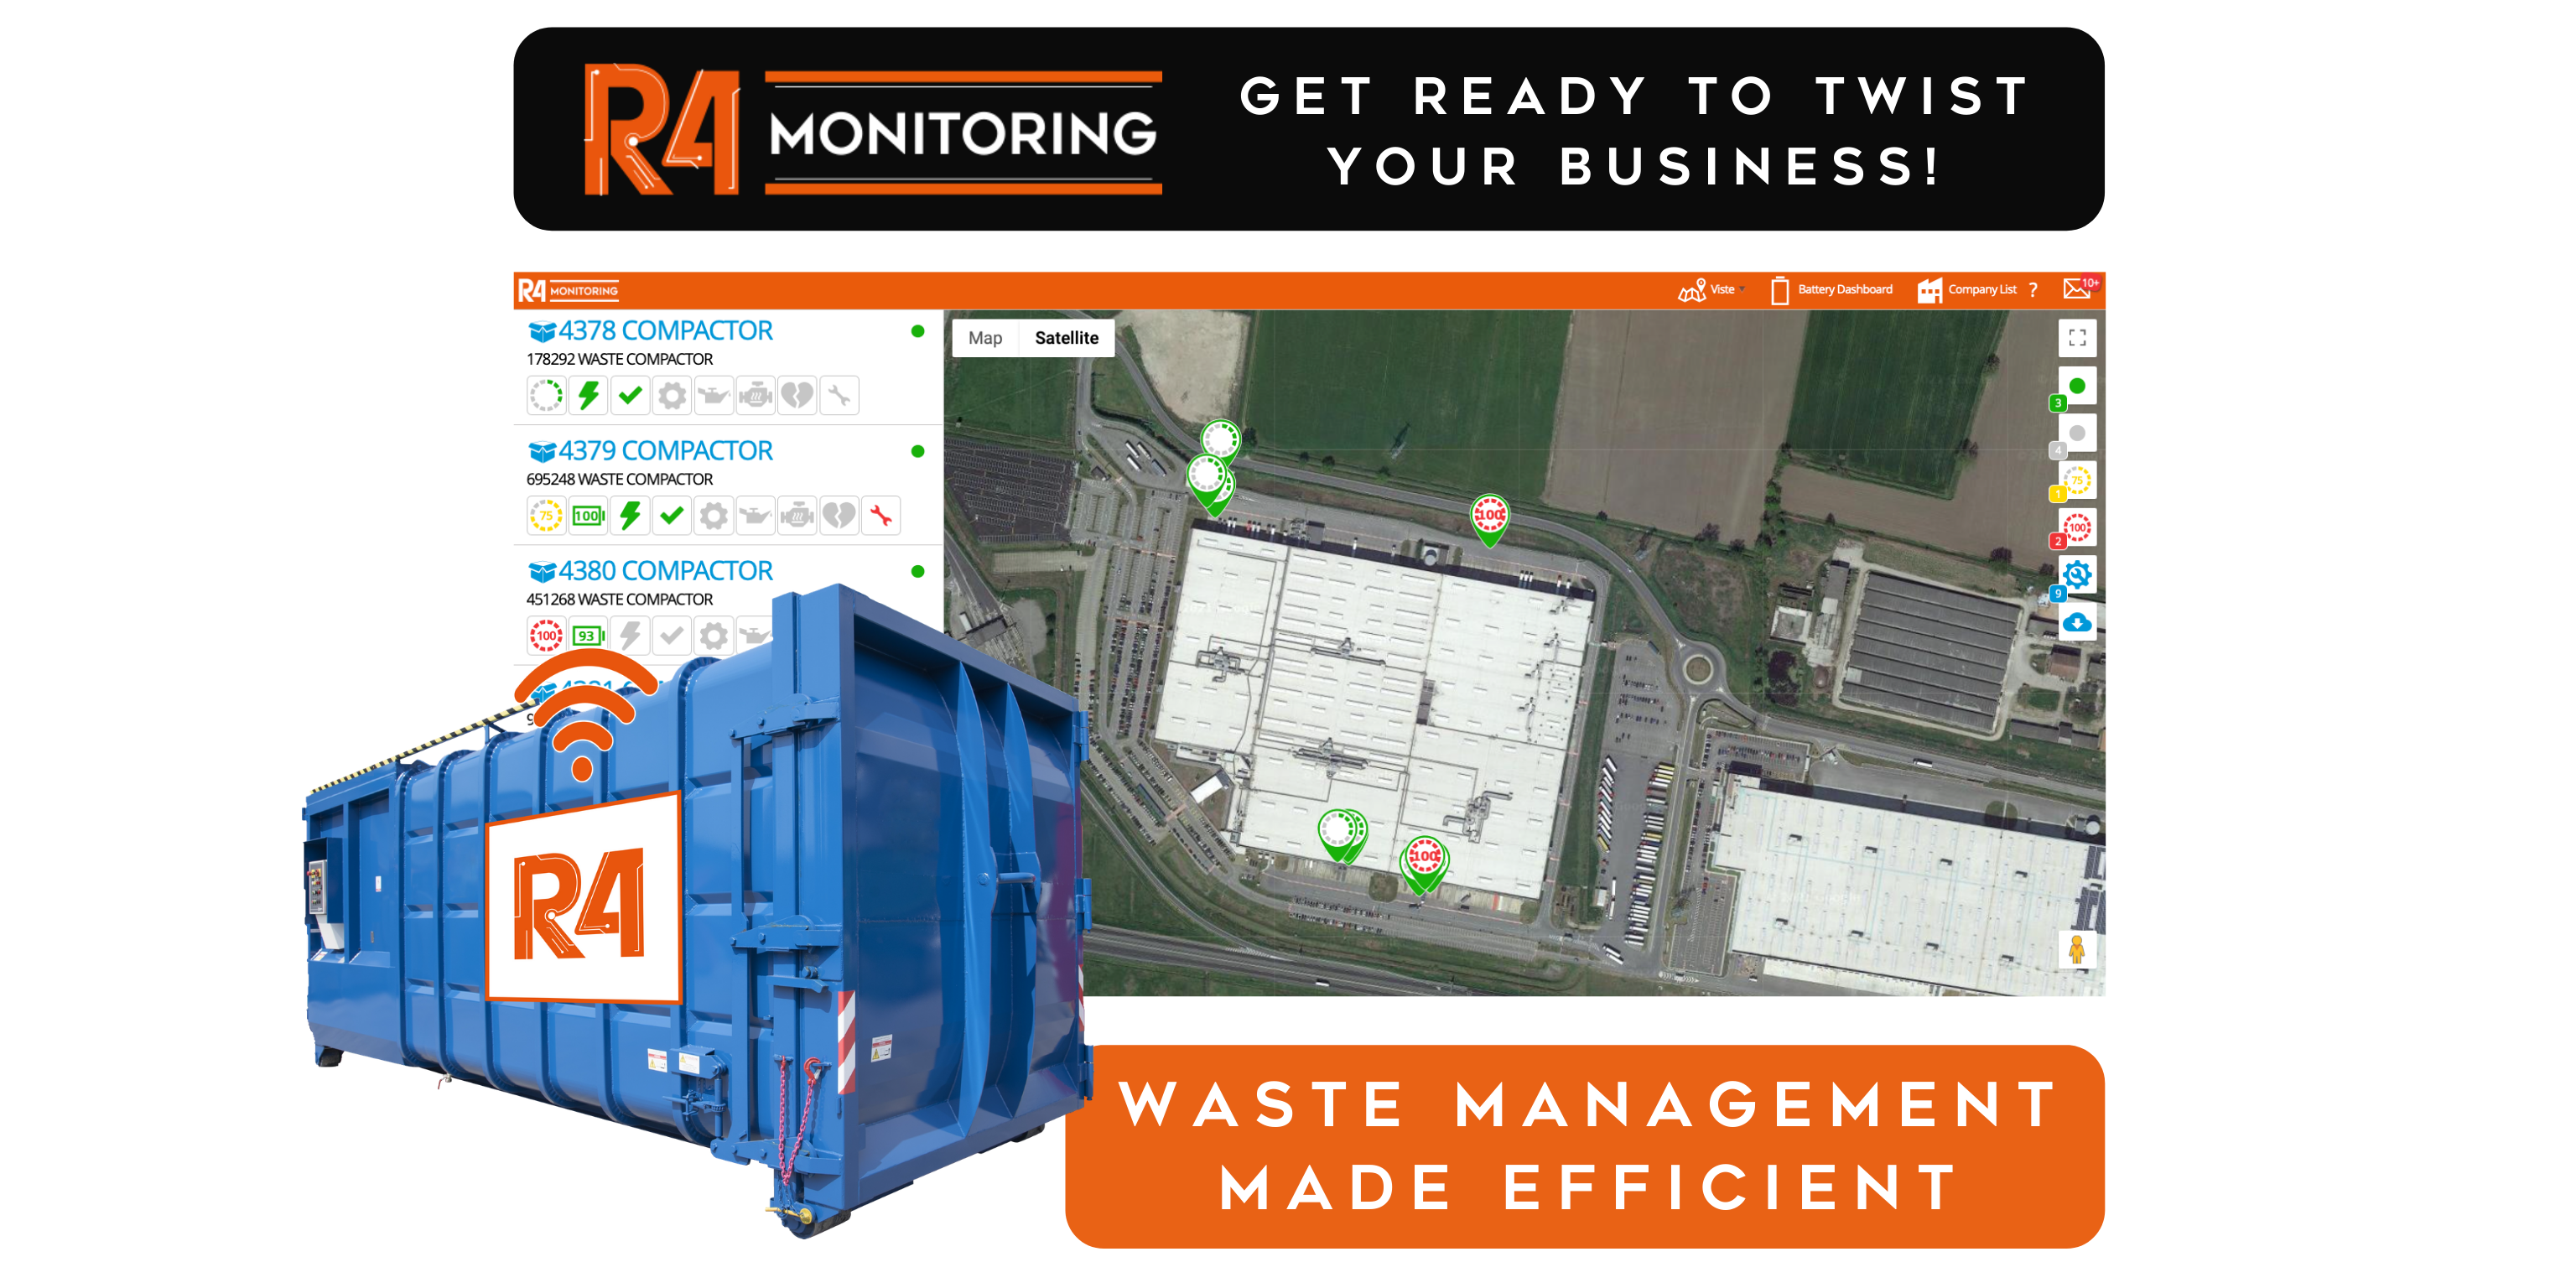 Discover how a Remote Monitoring System can twist your business, leading you in Digital Transformation era.